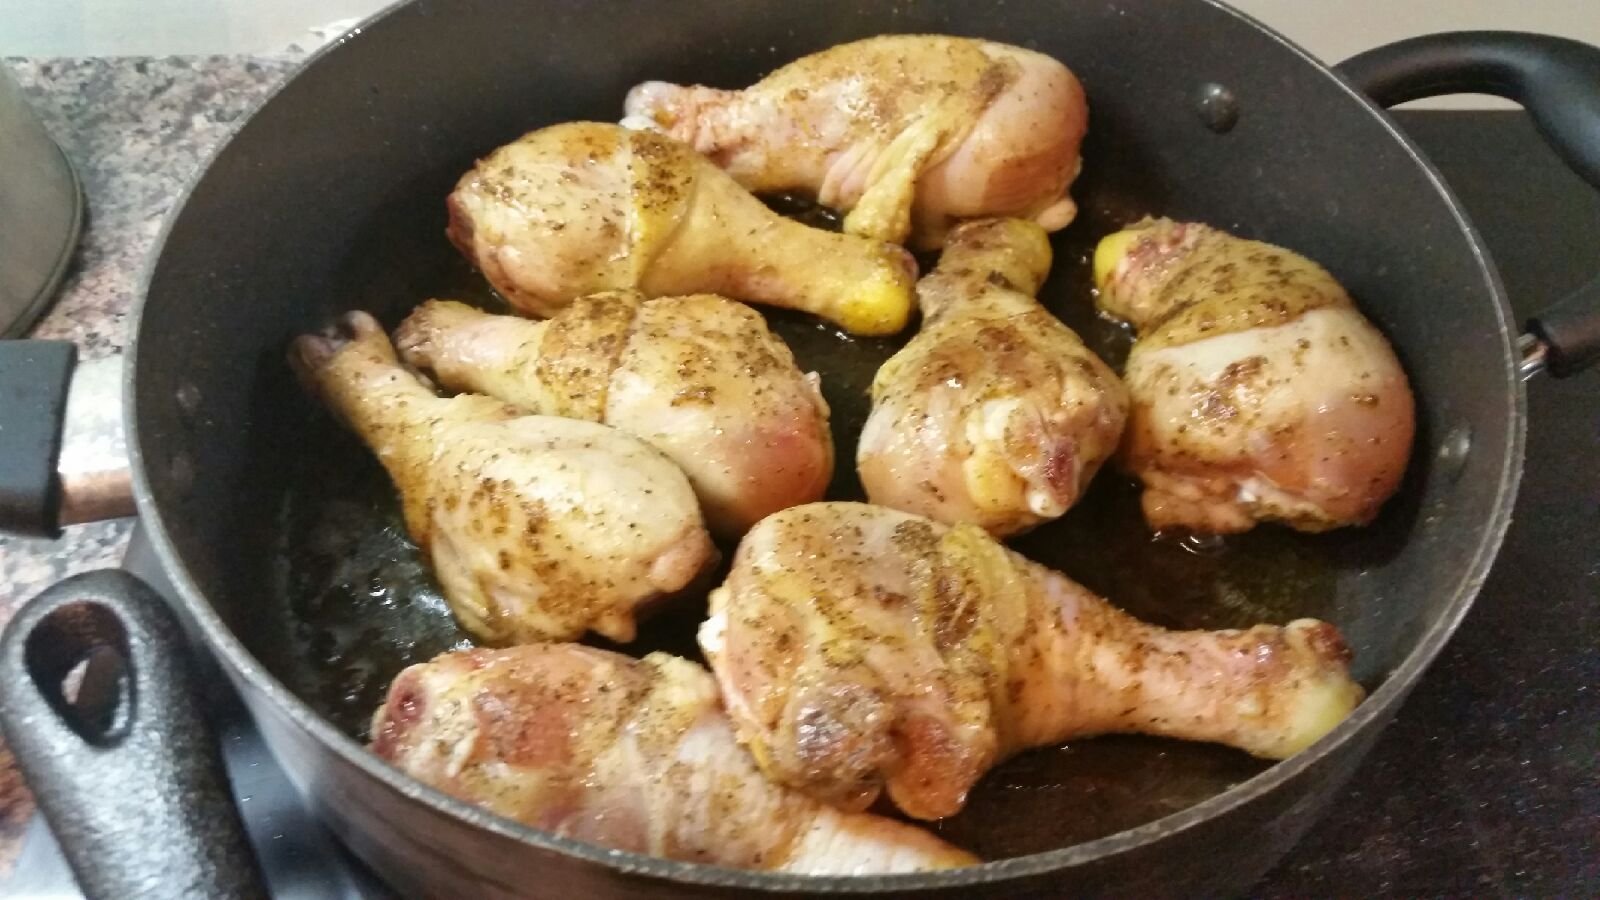 chicken for the gumbo...